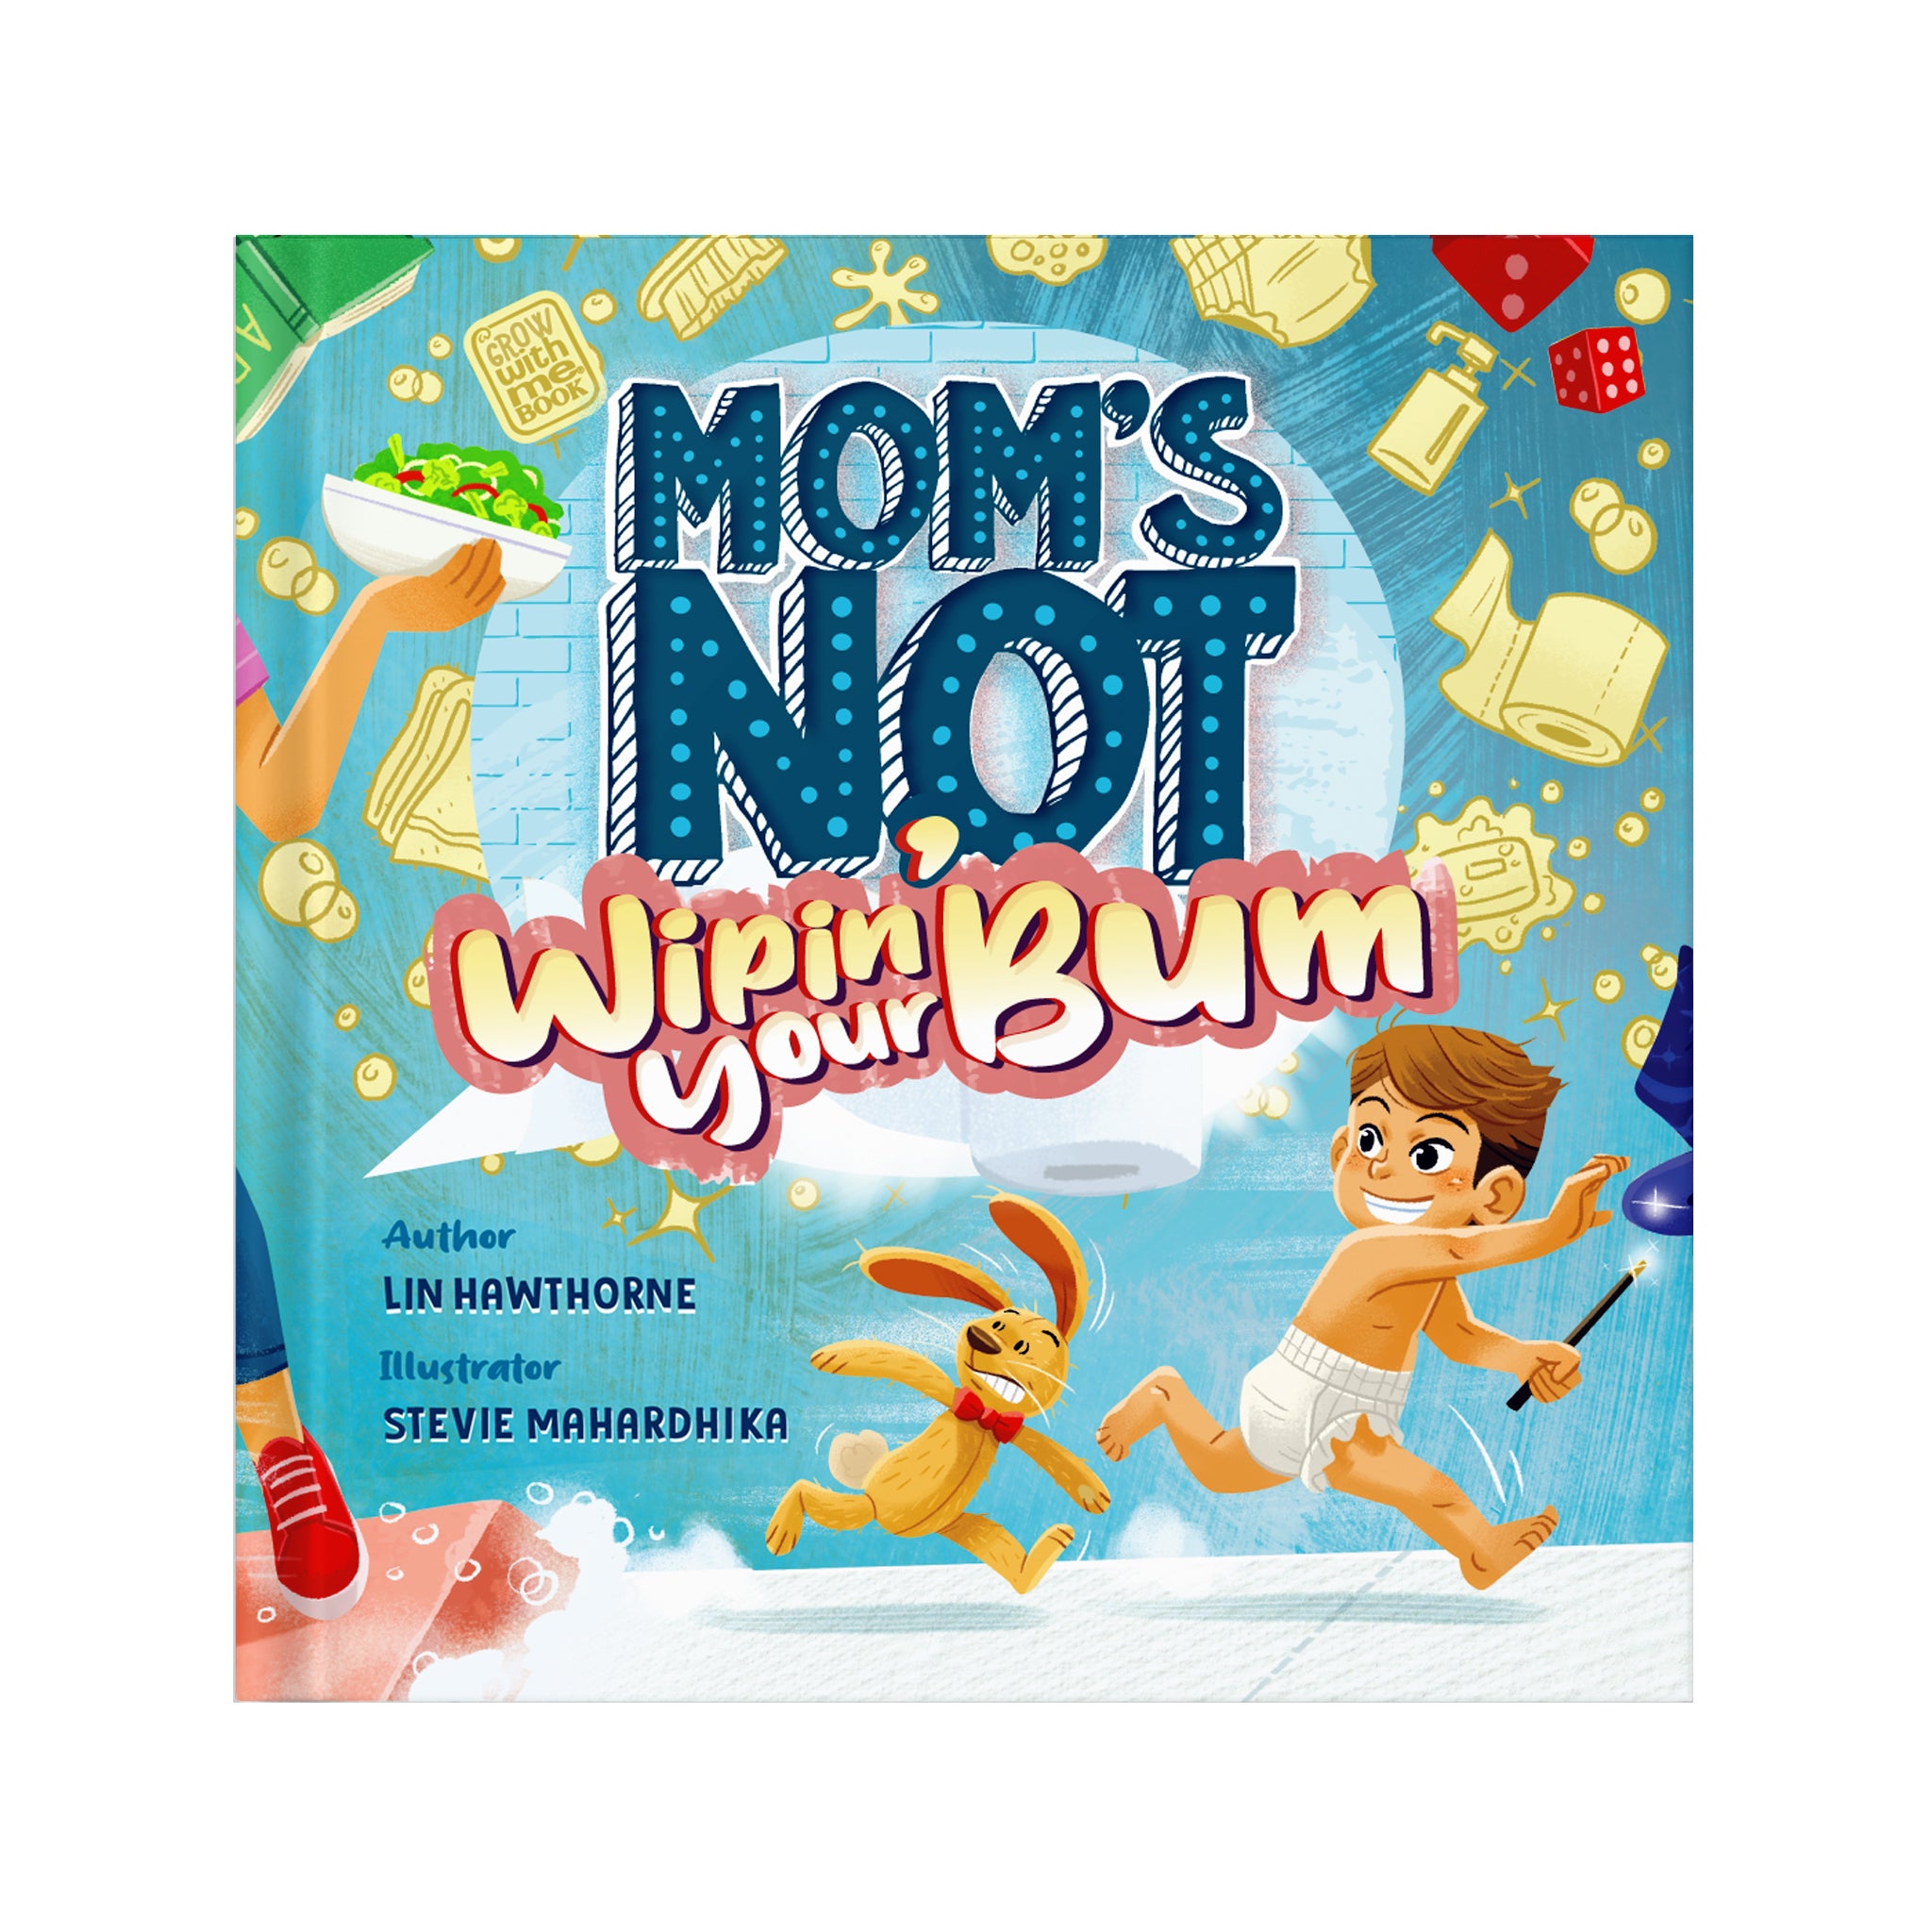 Mom's Not Wipin' Your Bum [hardcover] book comes with this bundle and makes a great birthday gift for kids ages 1 and up